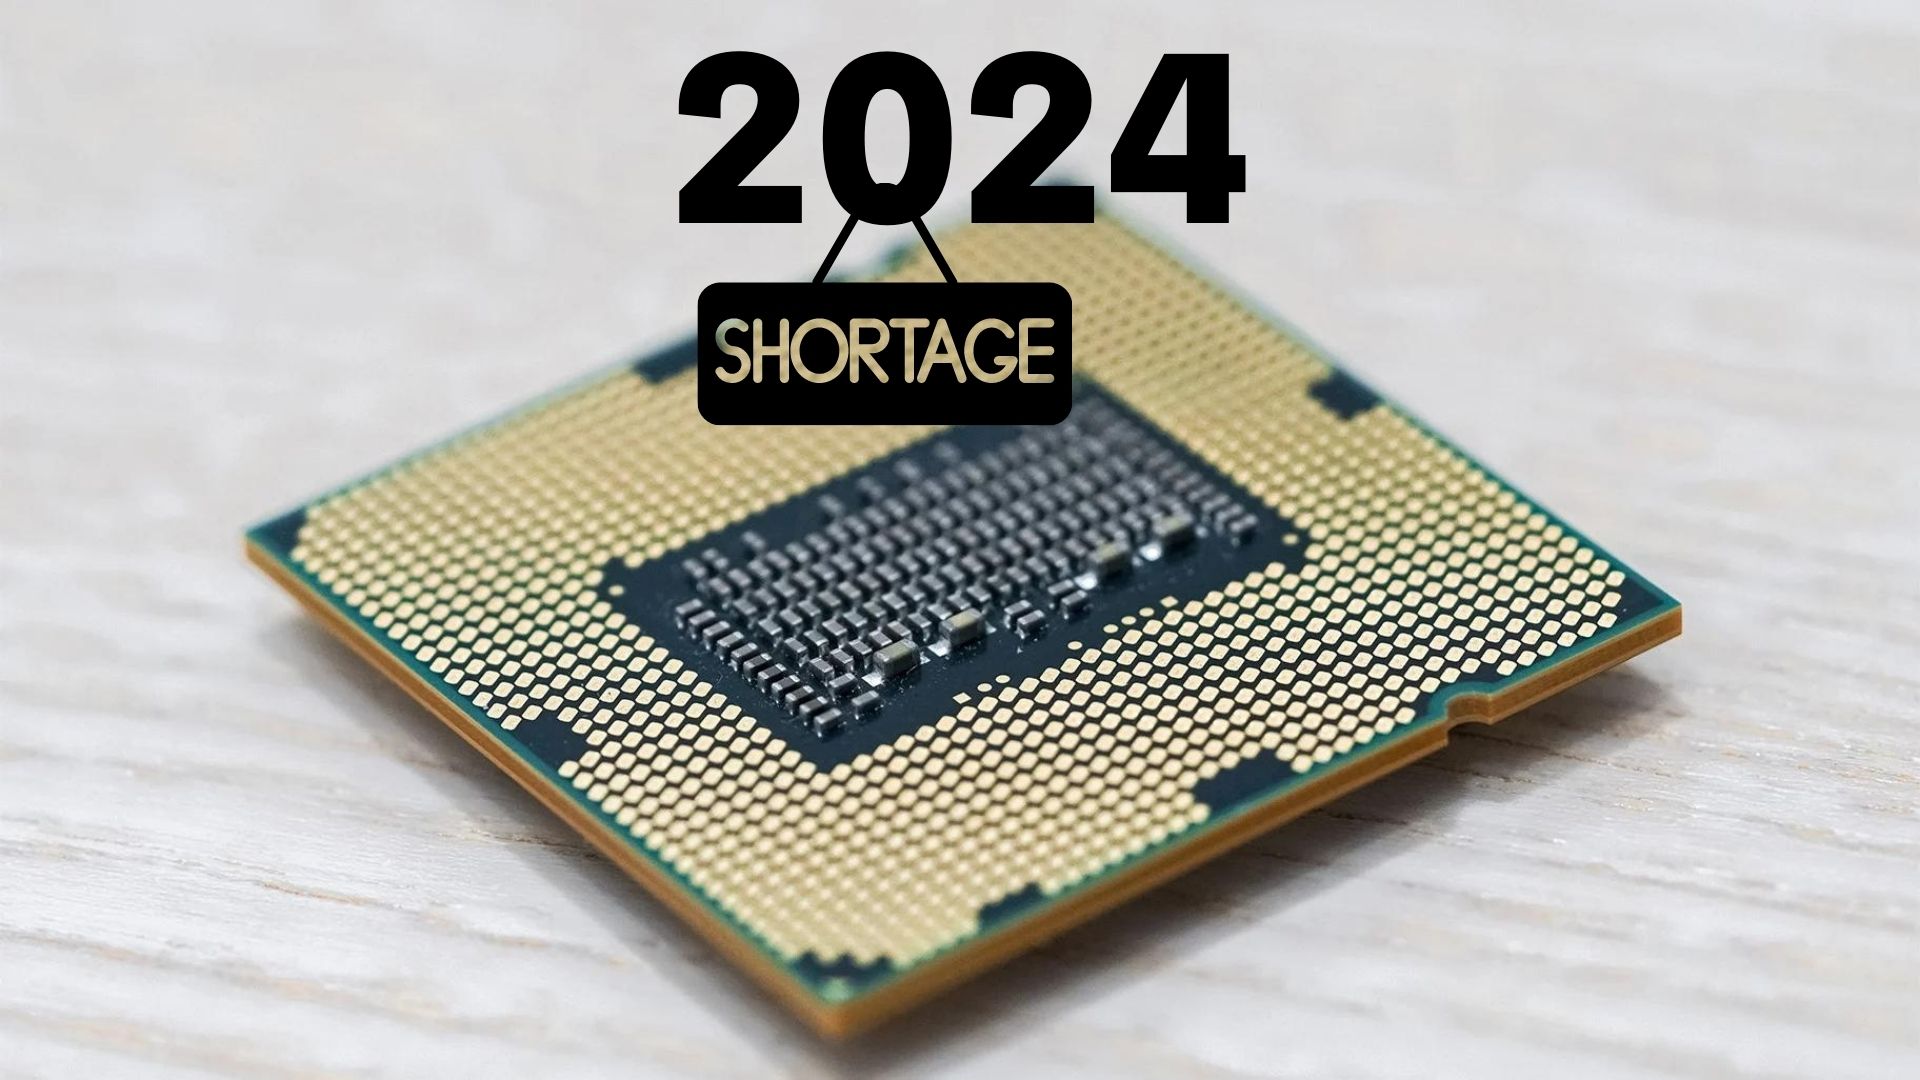 Chip Shortage to Carry into 2024, Says Intel CEO Video Game Soup